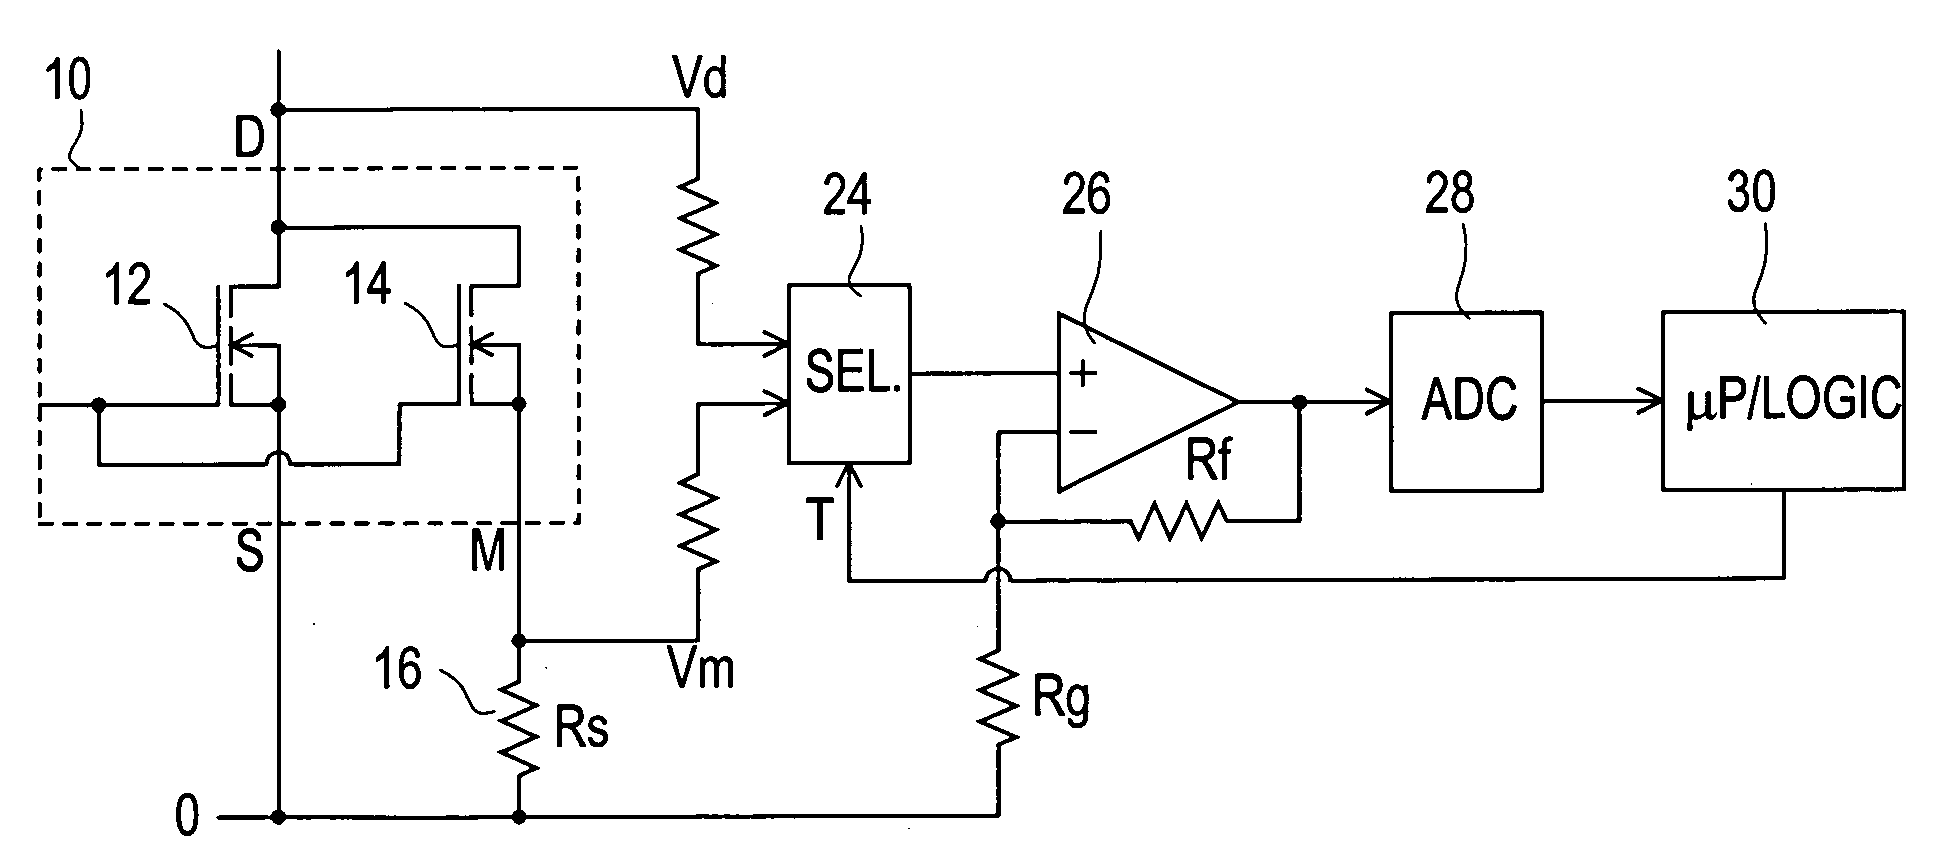 Current sensing for power MOSFETs